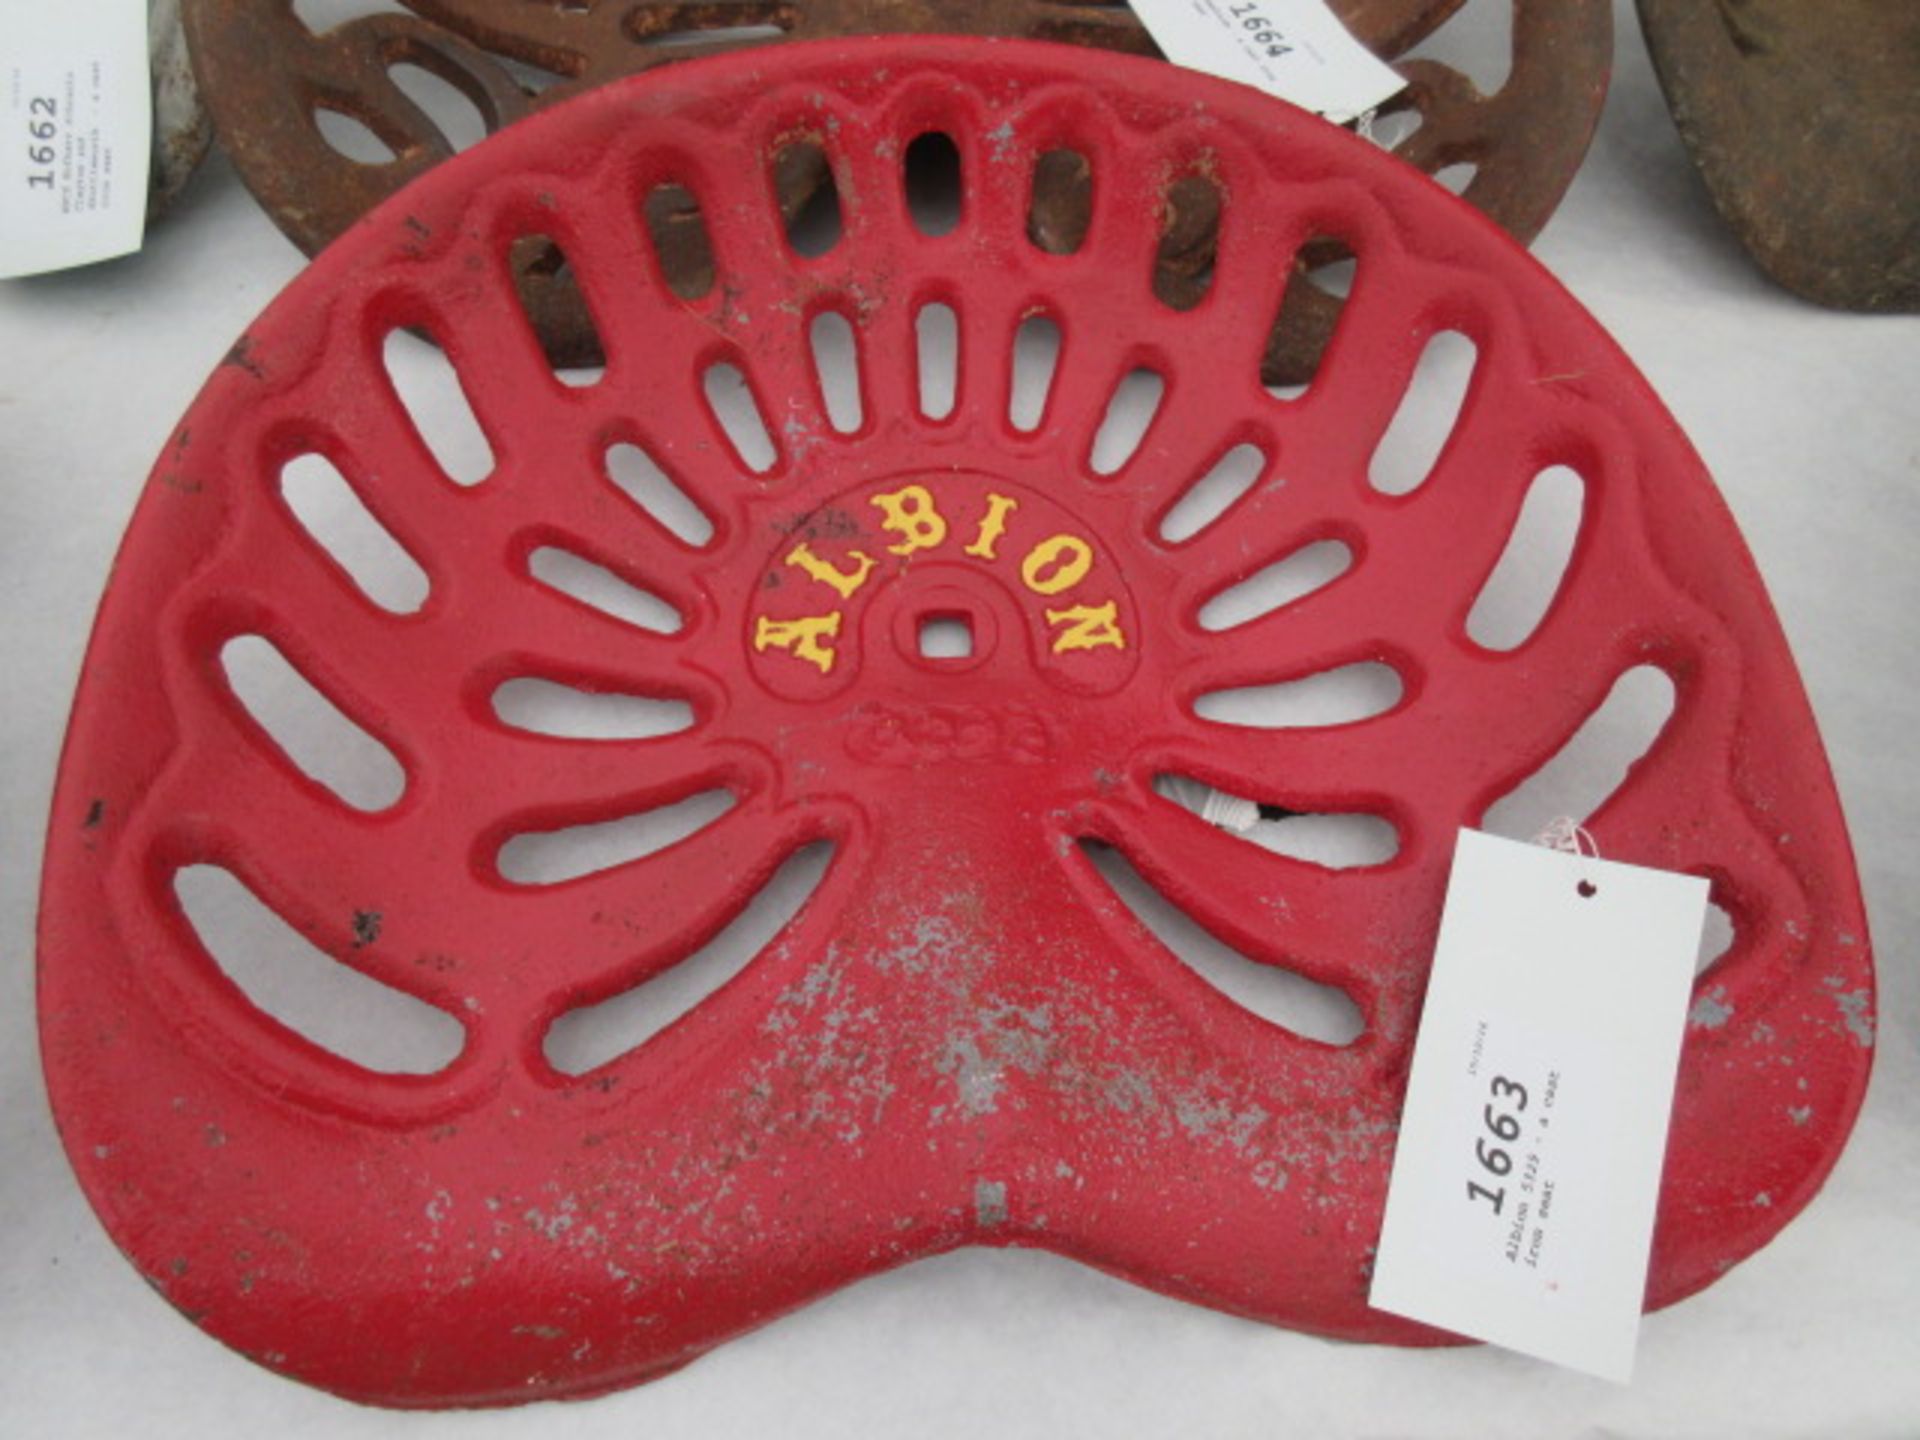 Albion 5329 - a cast iron seat